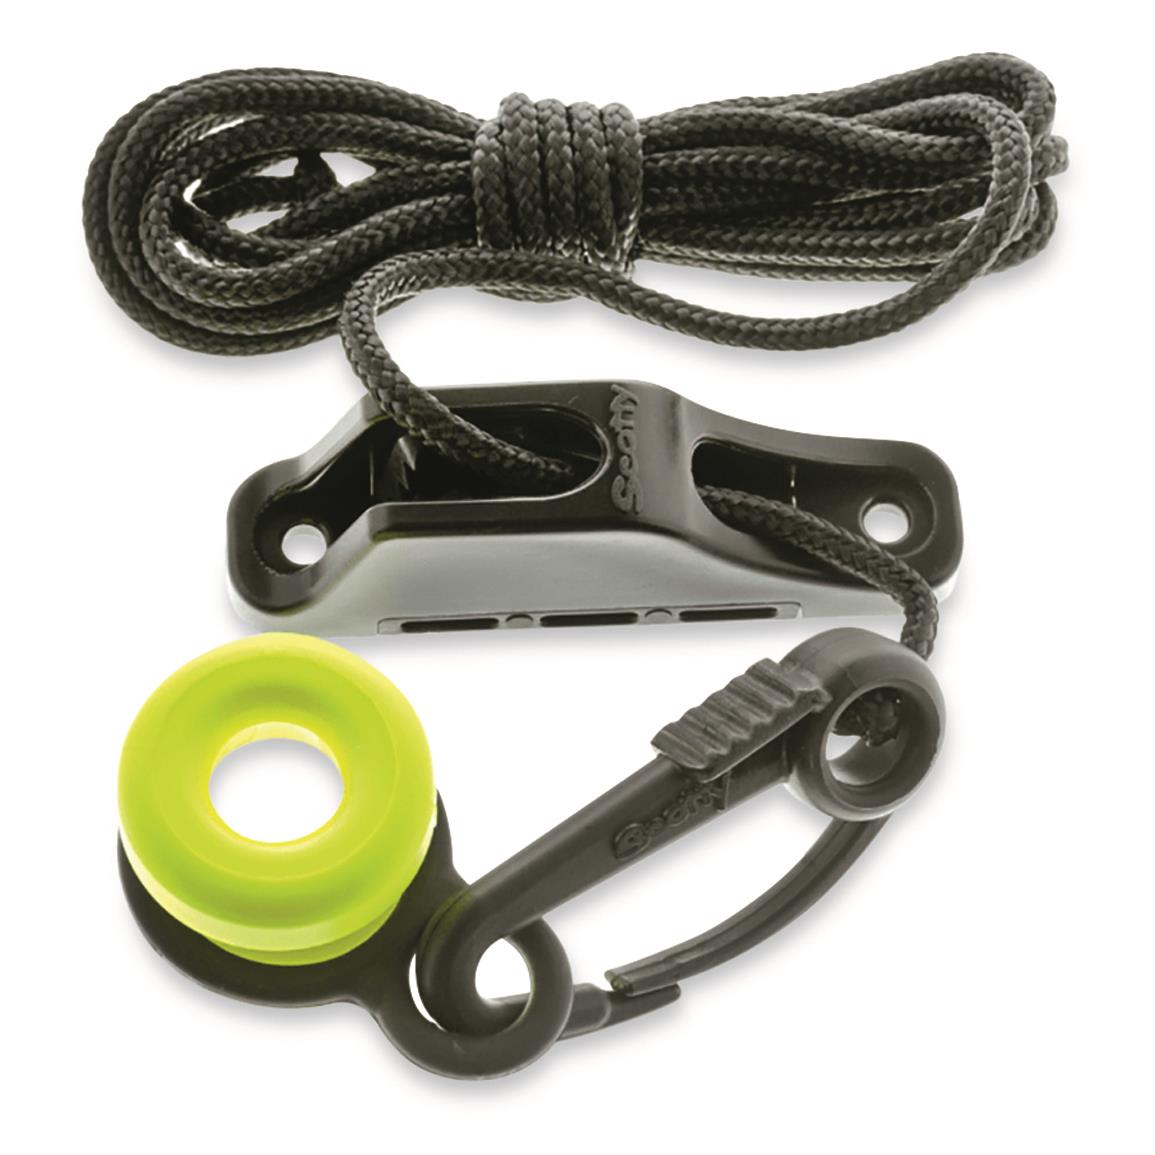 Scotty Downrigger Weight Retriever with Snap, Fairlead Cleat and